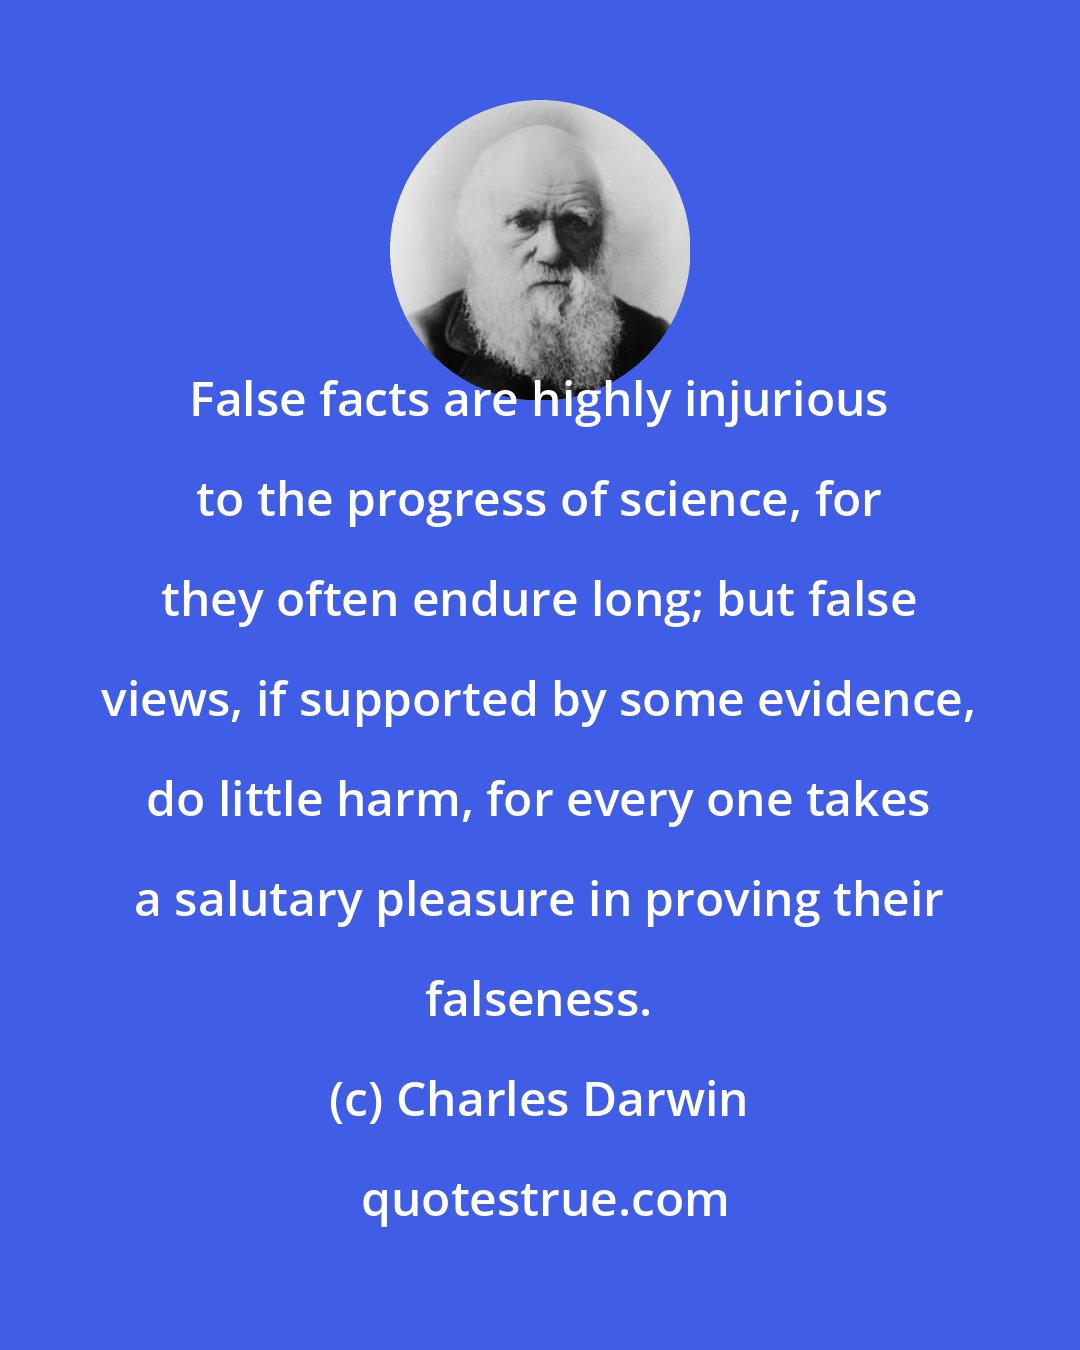 Charles Darwin: False facts are highly injurious to the progress of science, for they often endure long; but false views, if supported by some evidence, do little harm, for every one takes a salutary pleasure in proving their falseness.